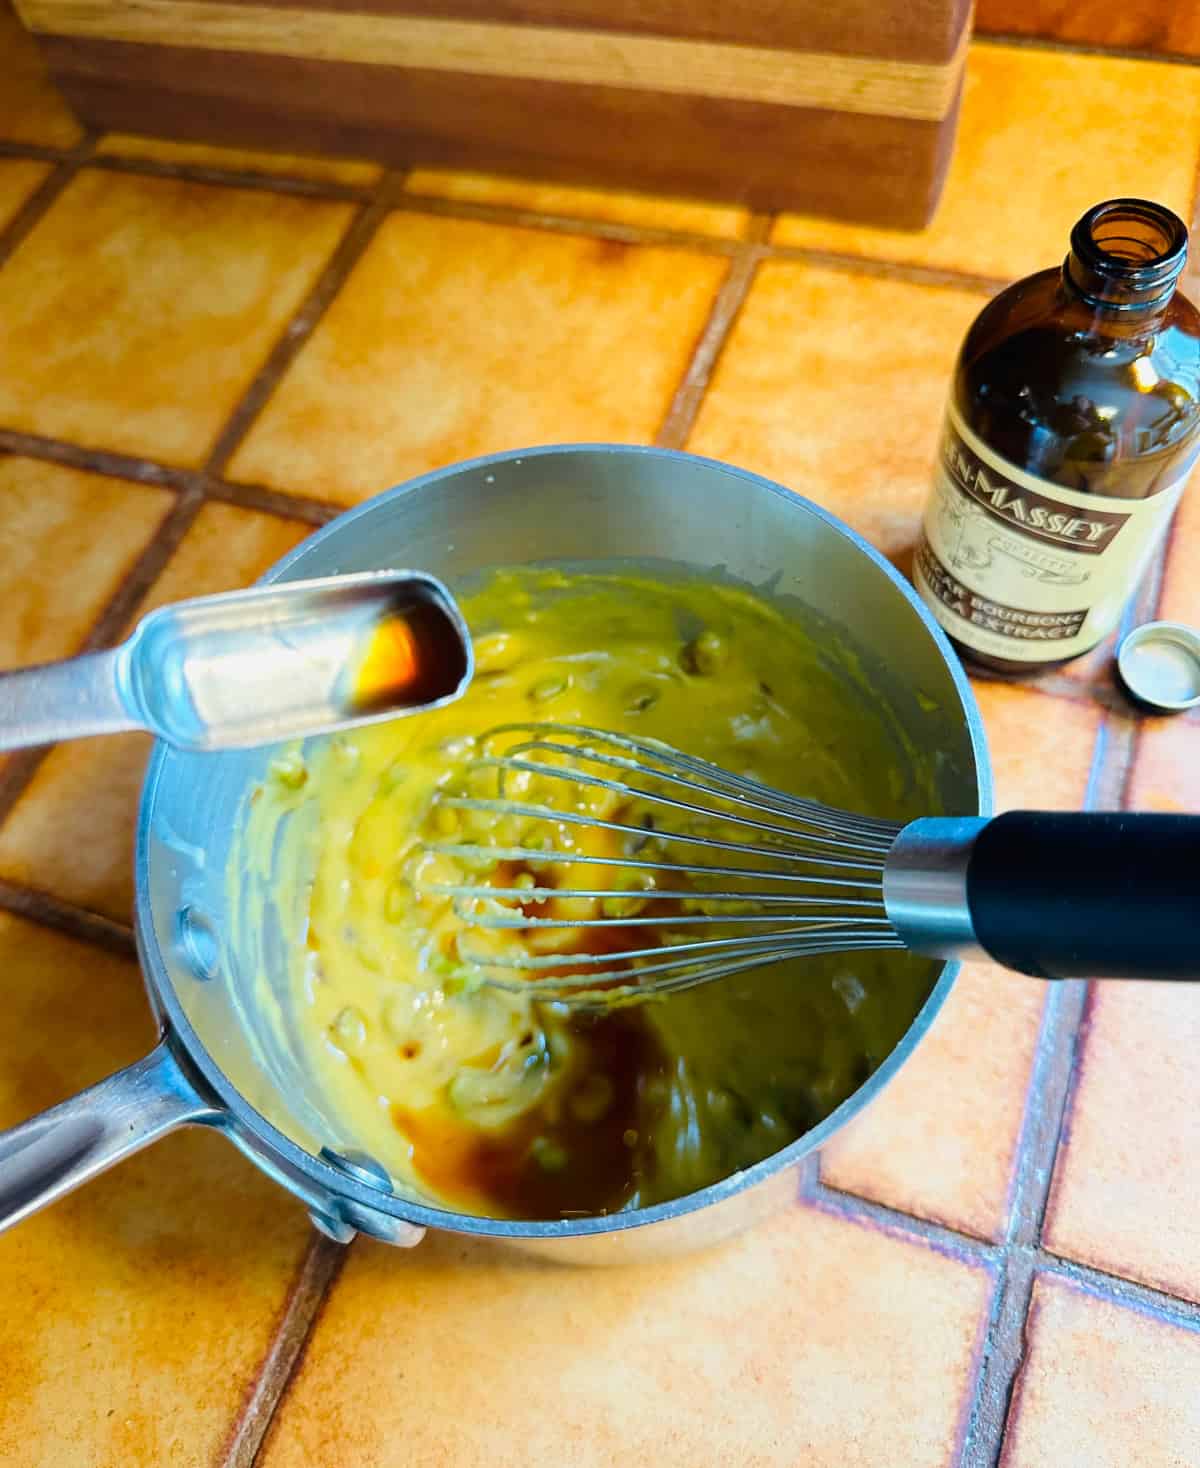 Vanilla extract being poured from a teaspoon into pistachio pastry cream in a small steel saucepan with a whisk.